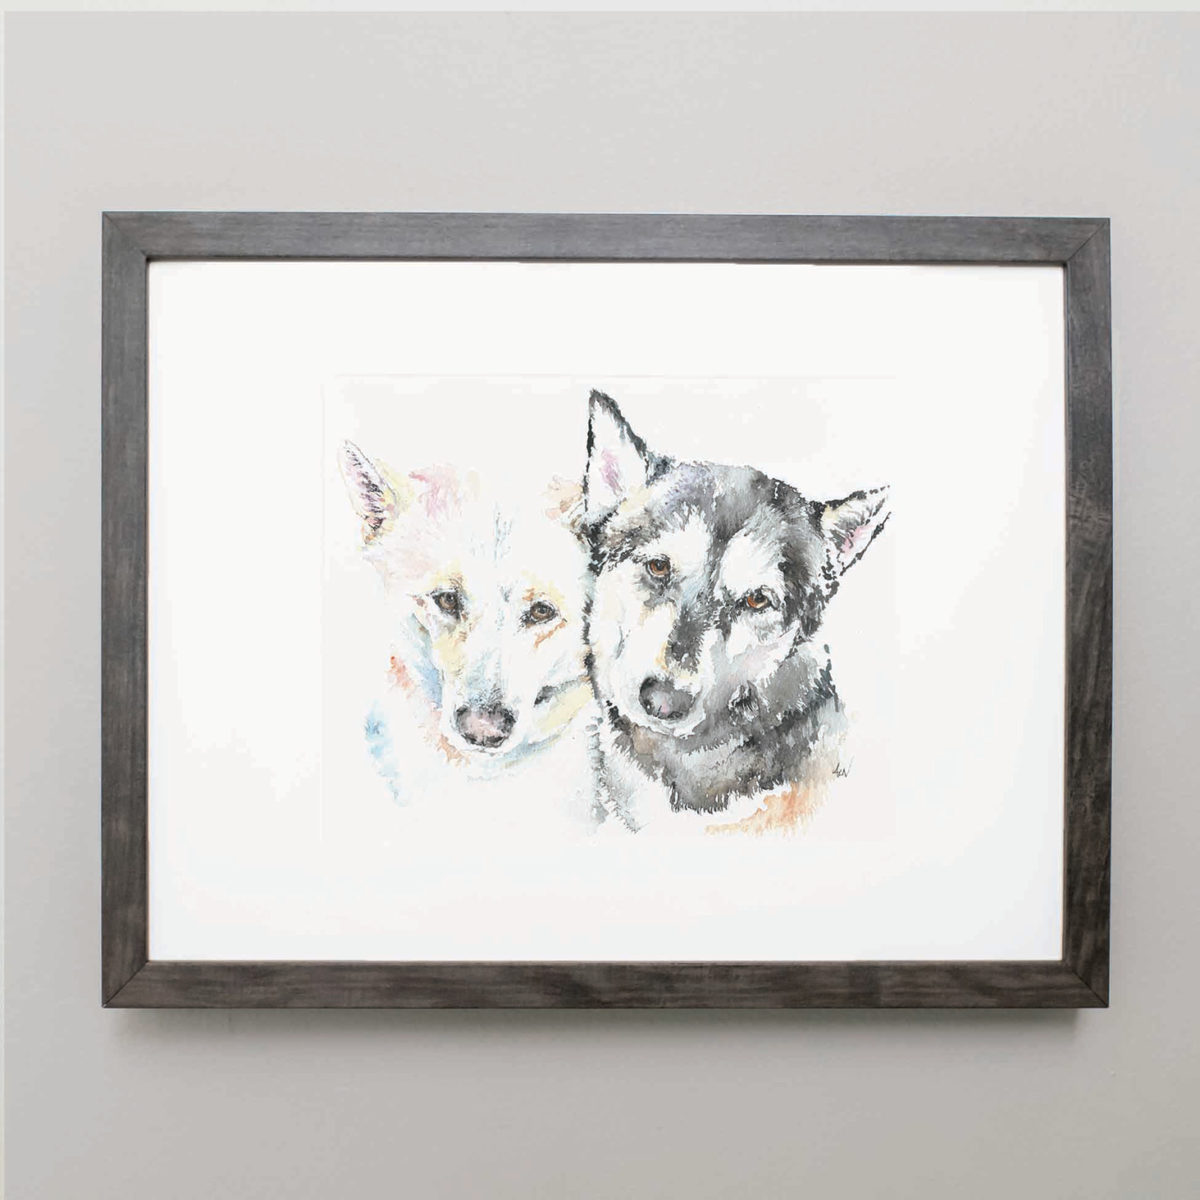 Watercolor of two huskies in a gray frame